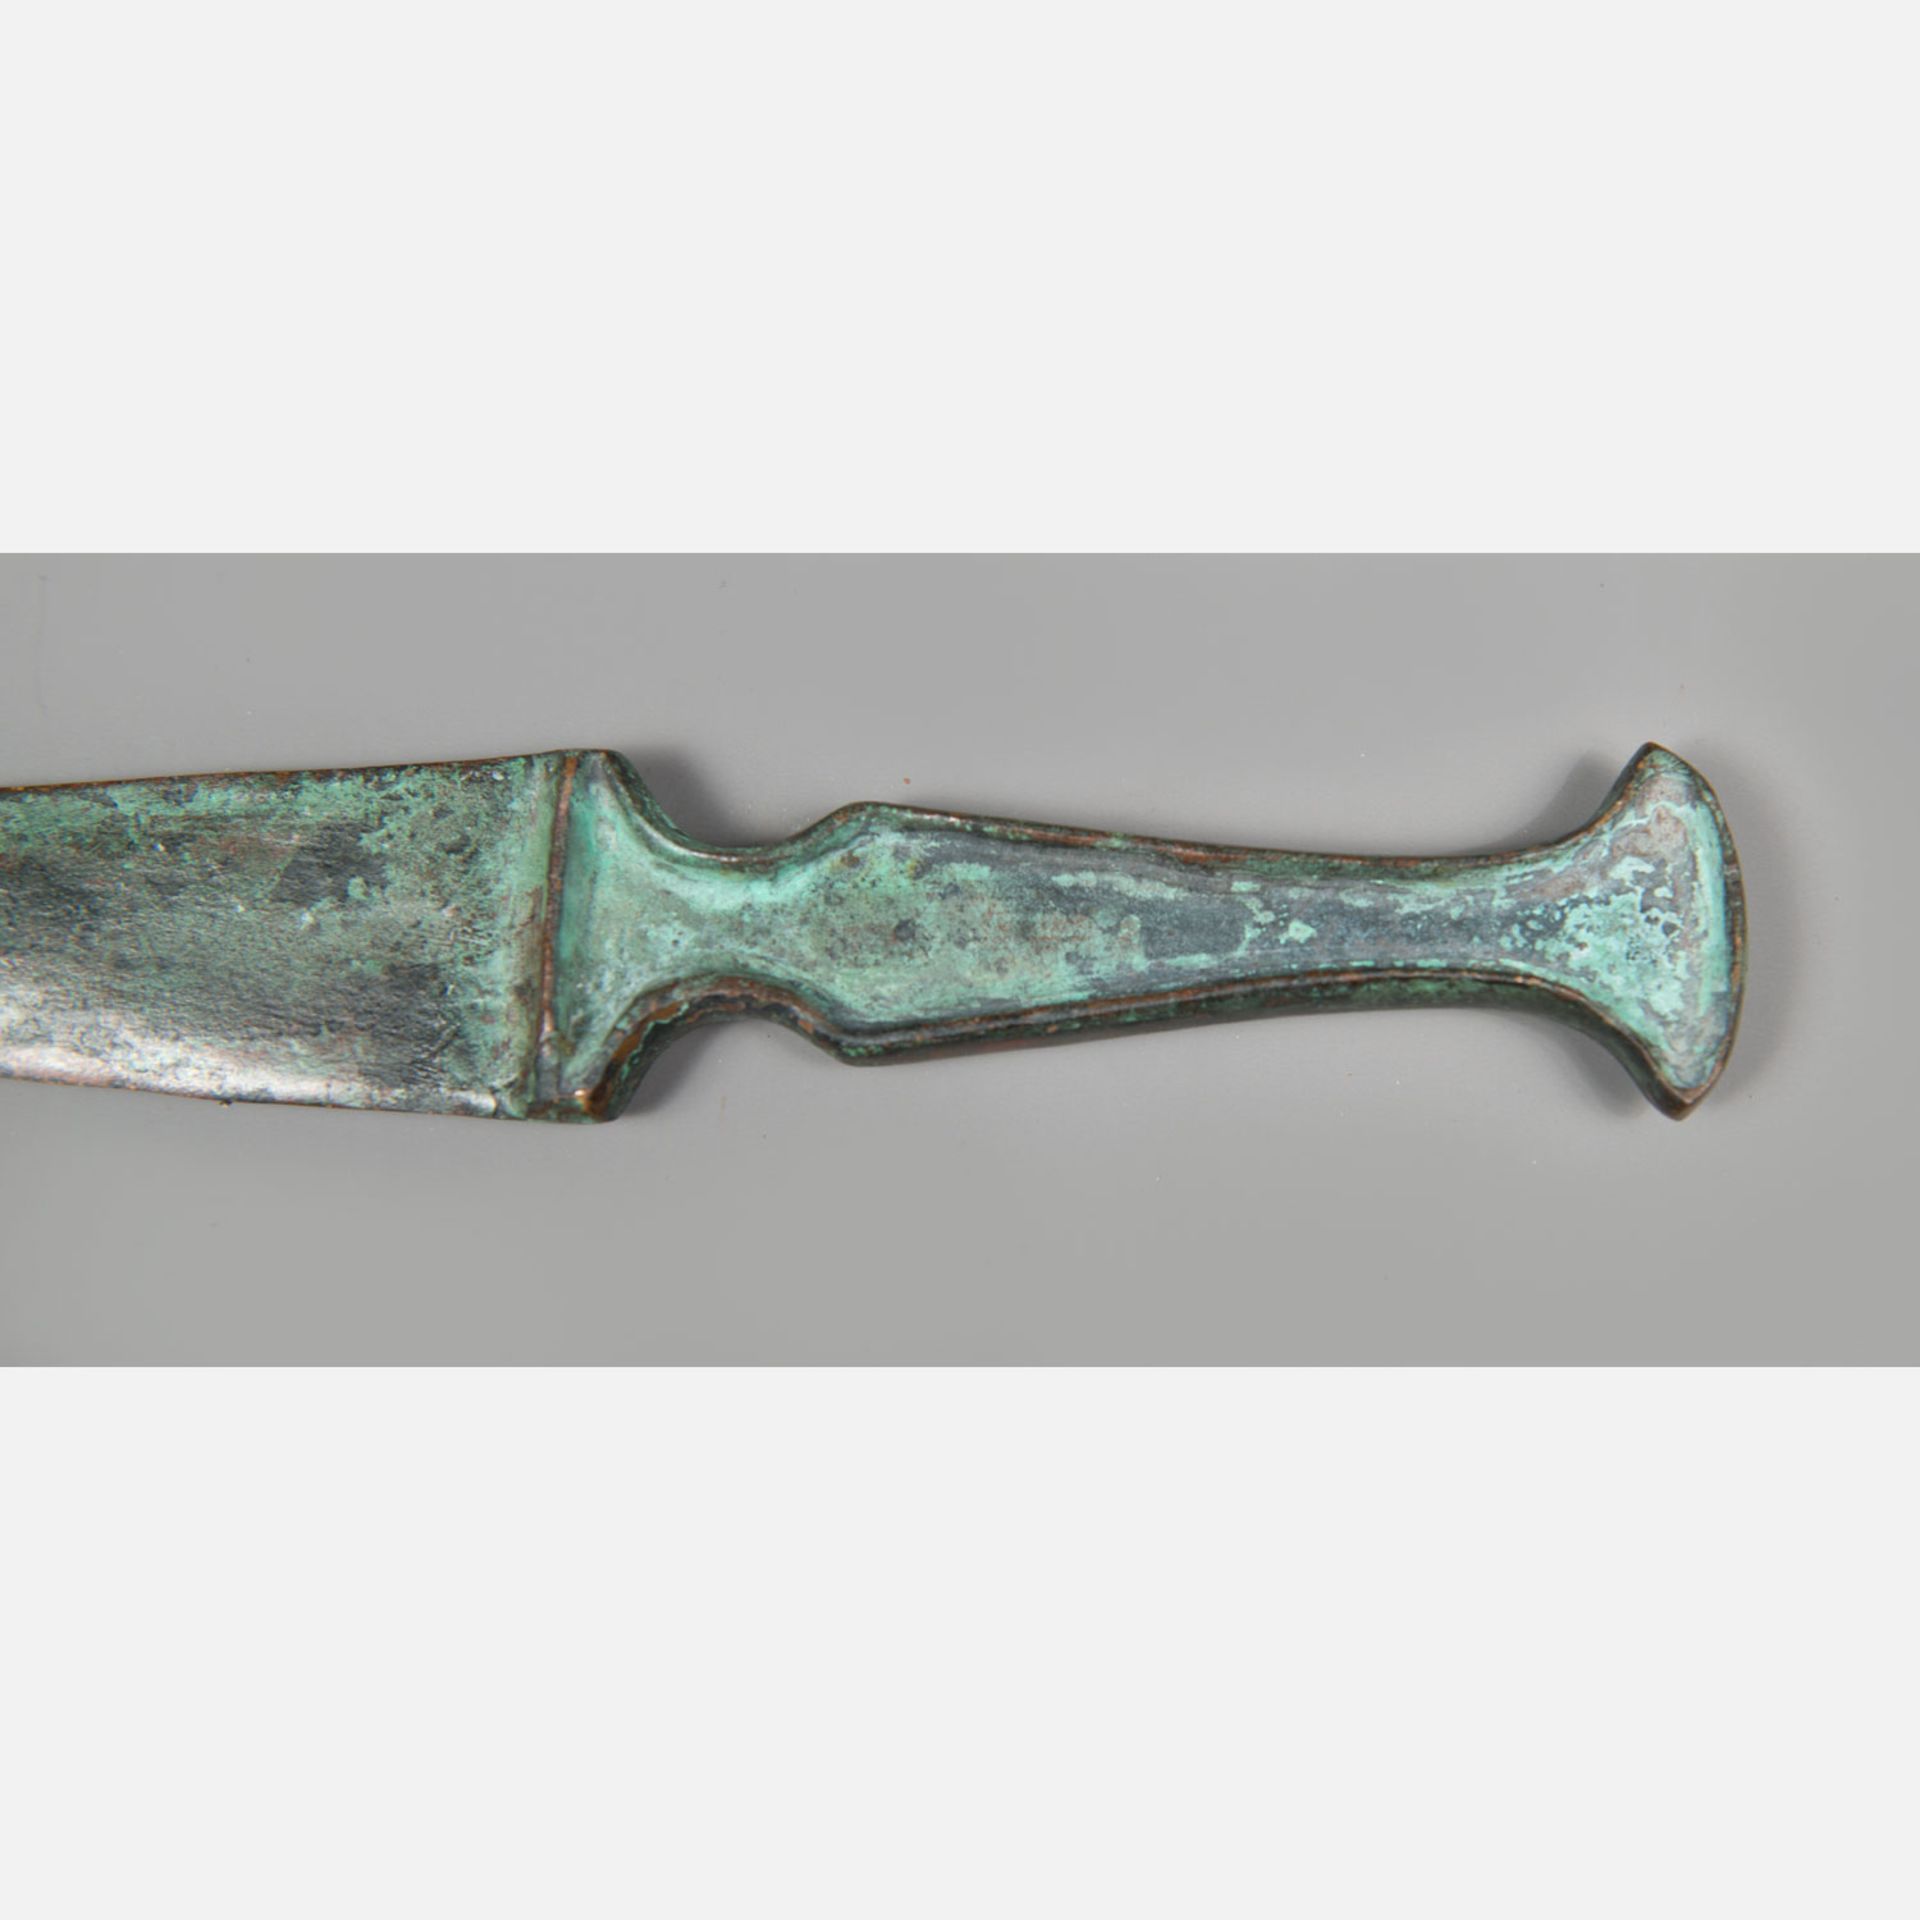 Ancient bronce dagger - Image 2 of 3